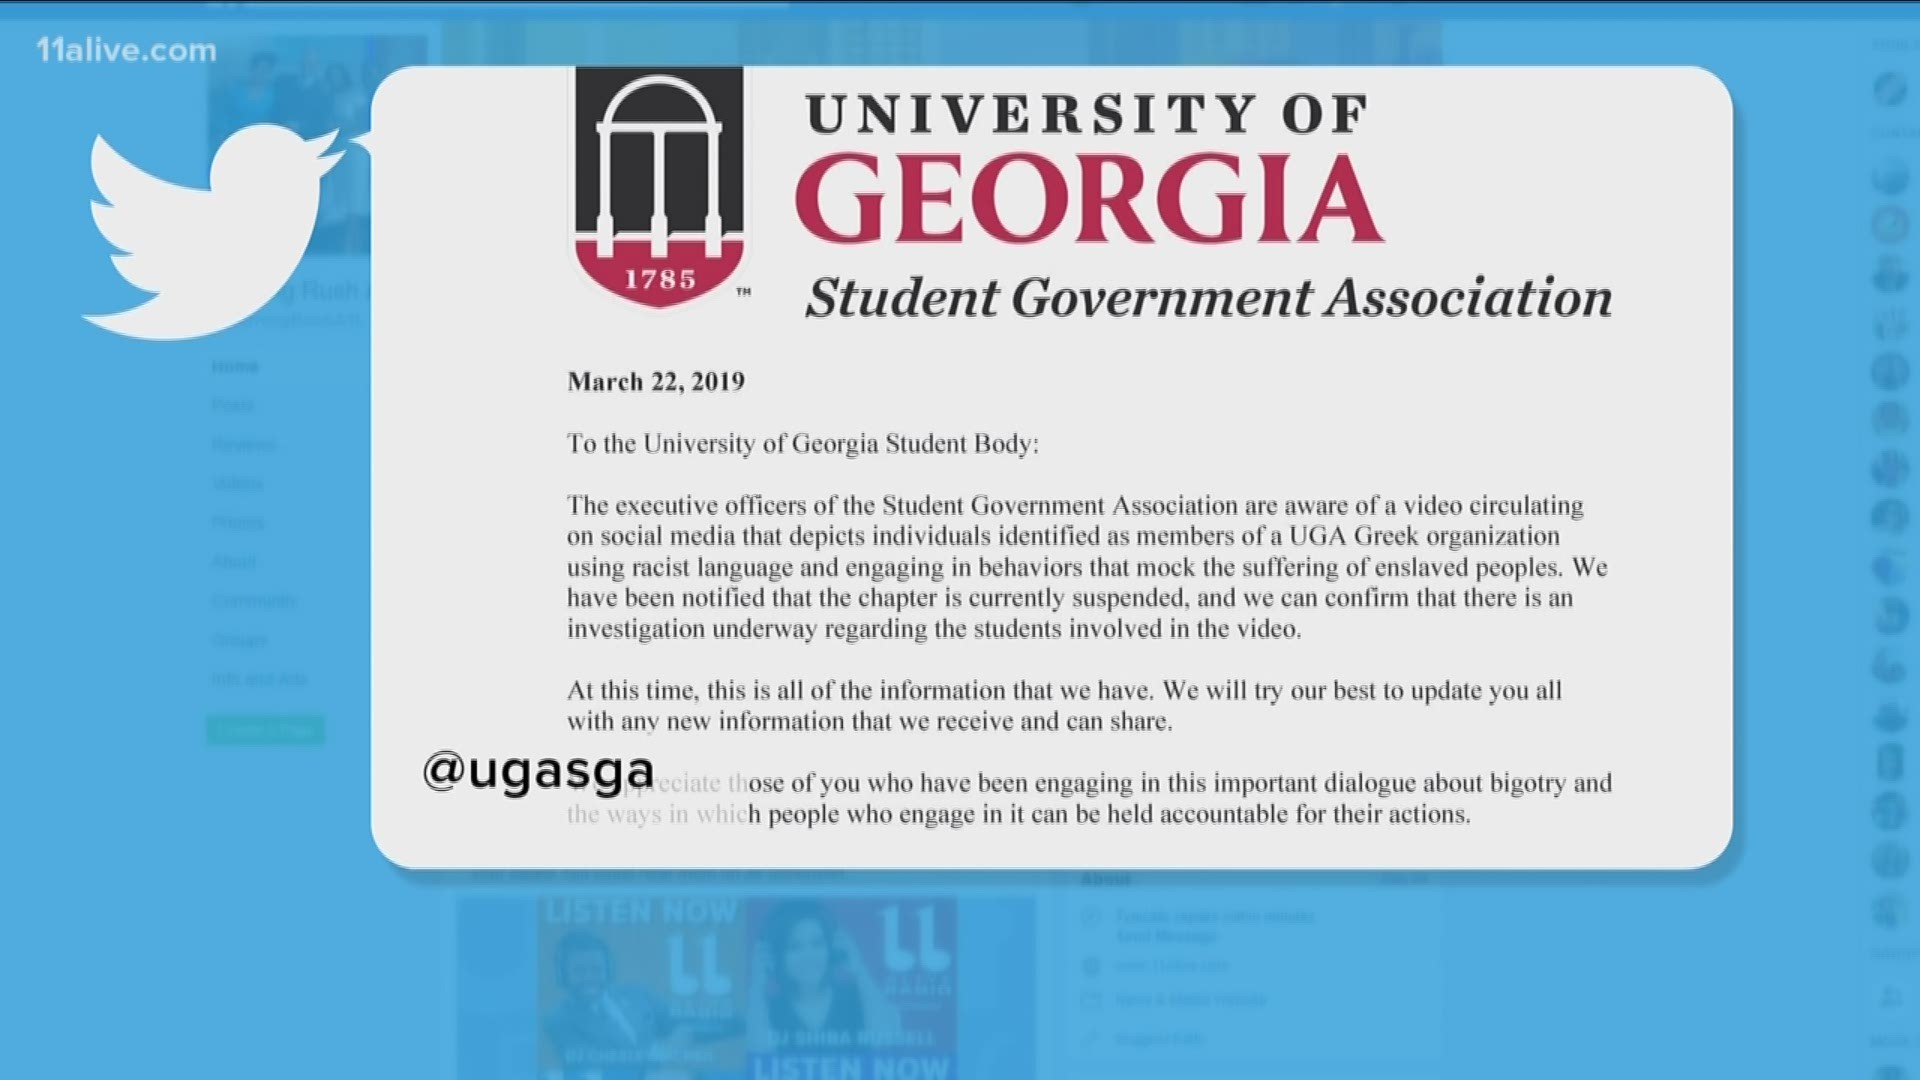 A fraternity has suspended four of its members at the University of Georgia after a video allegedly showed them participating in racist acts - and using a slur at least once.